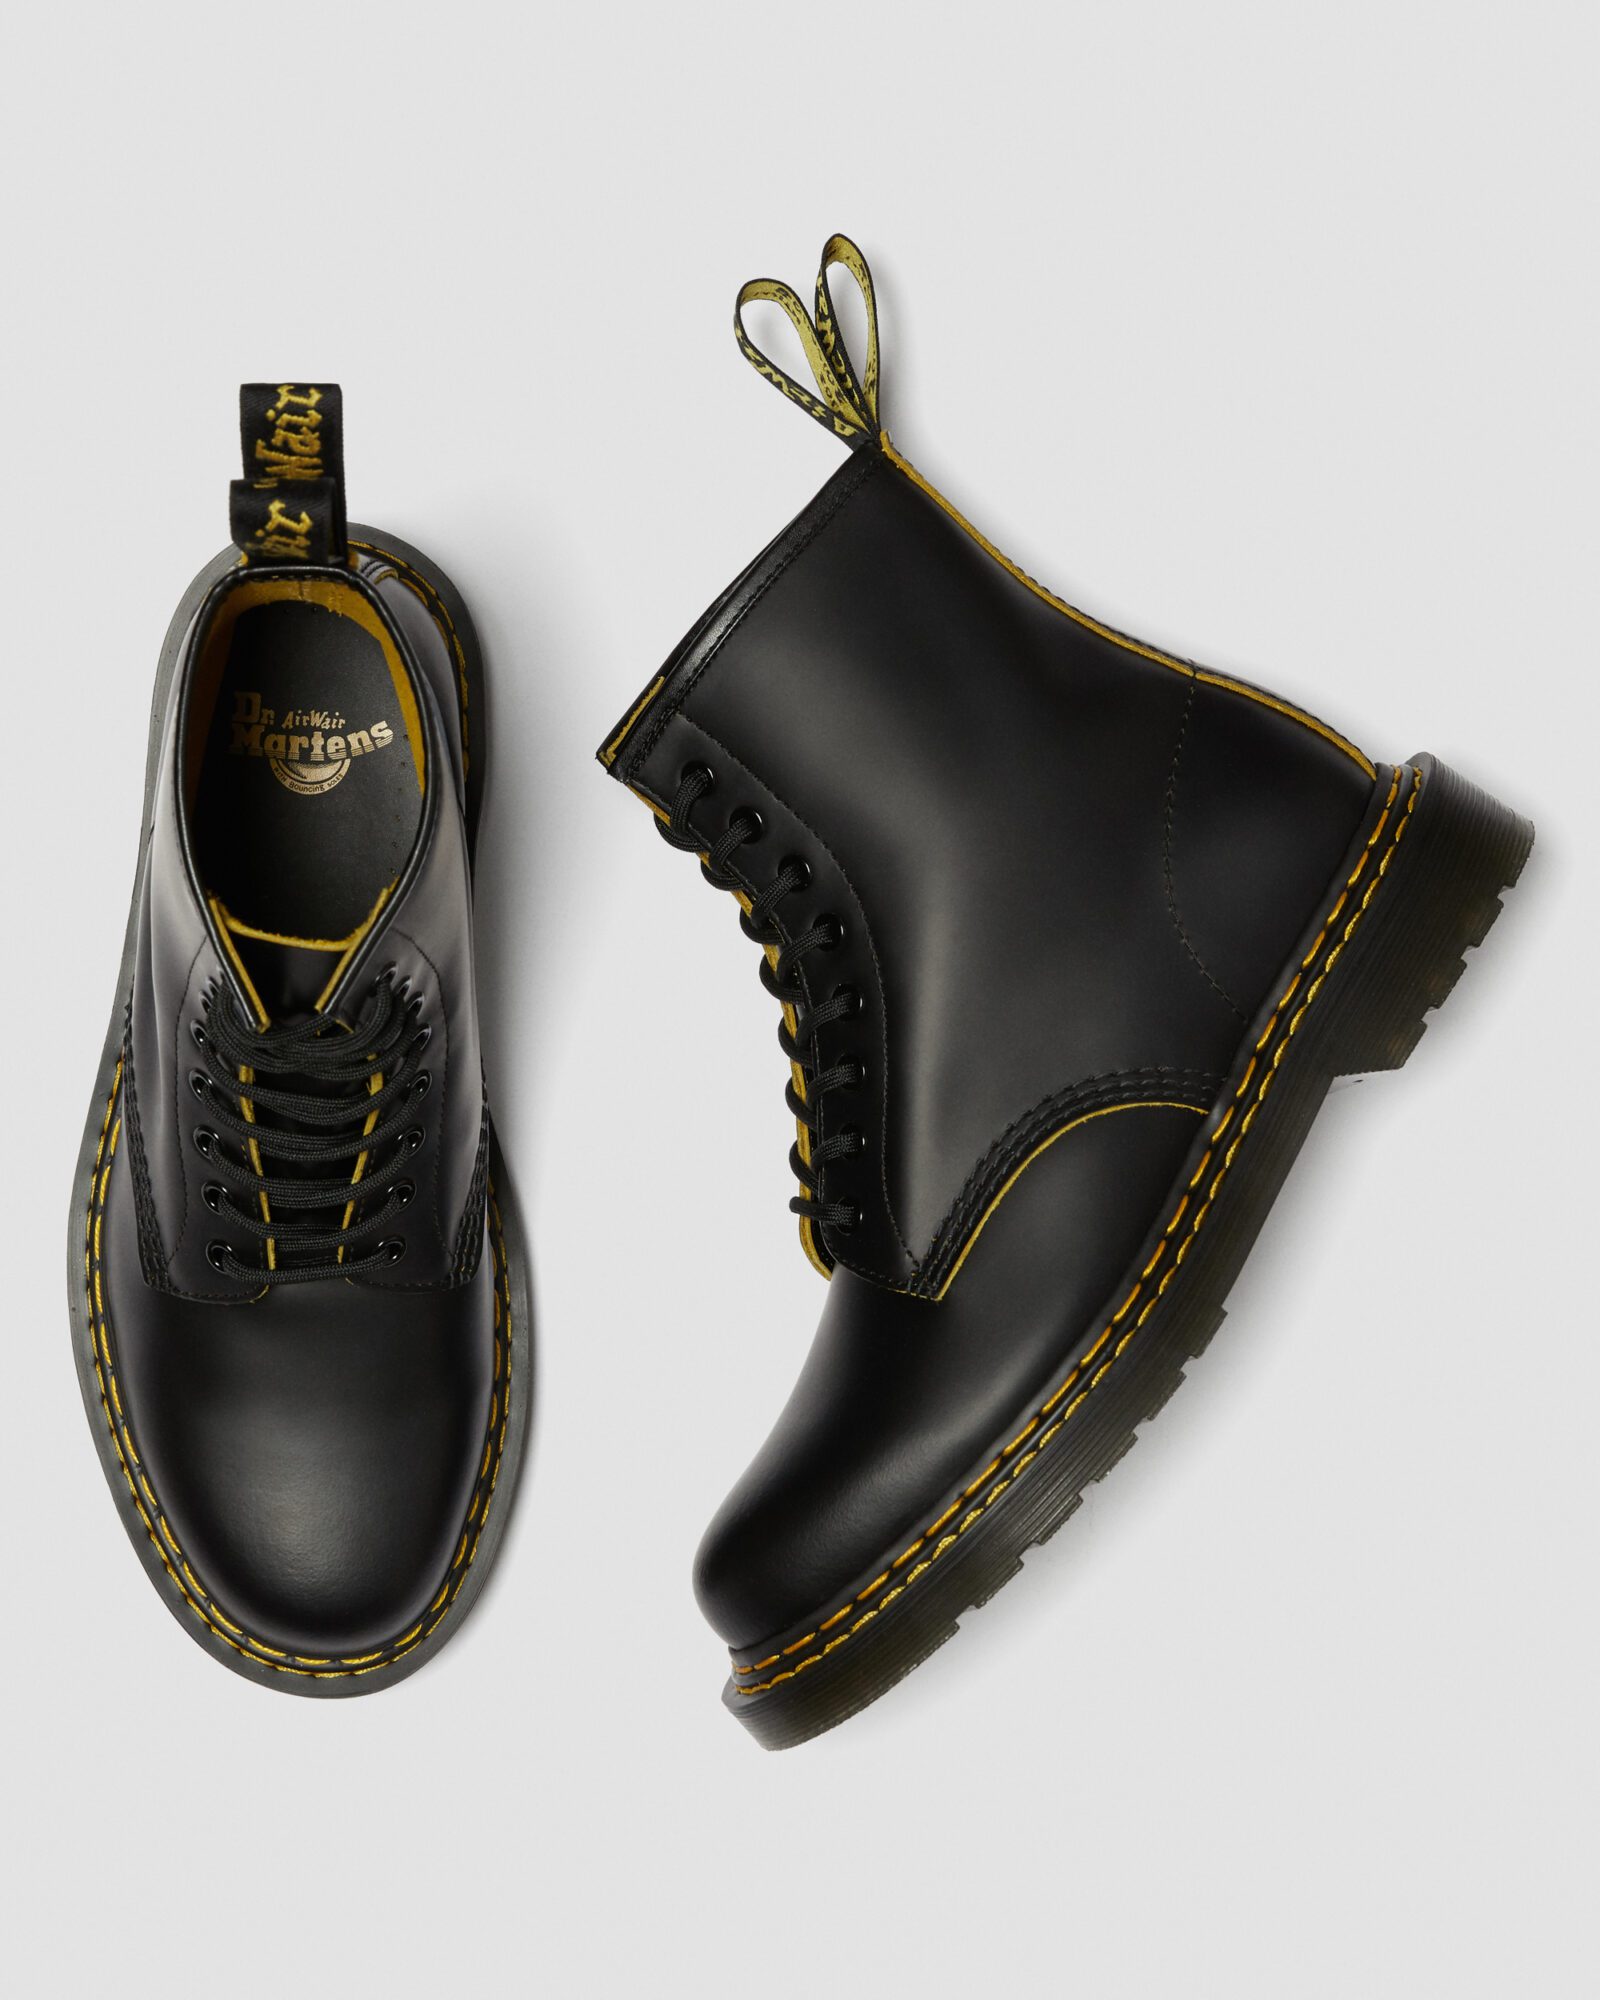 dr martens limited edition 5th anniversary